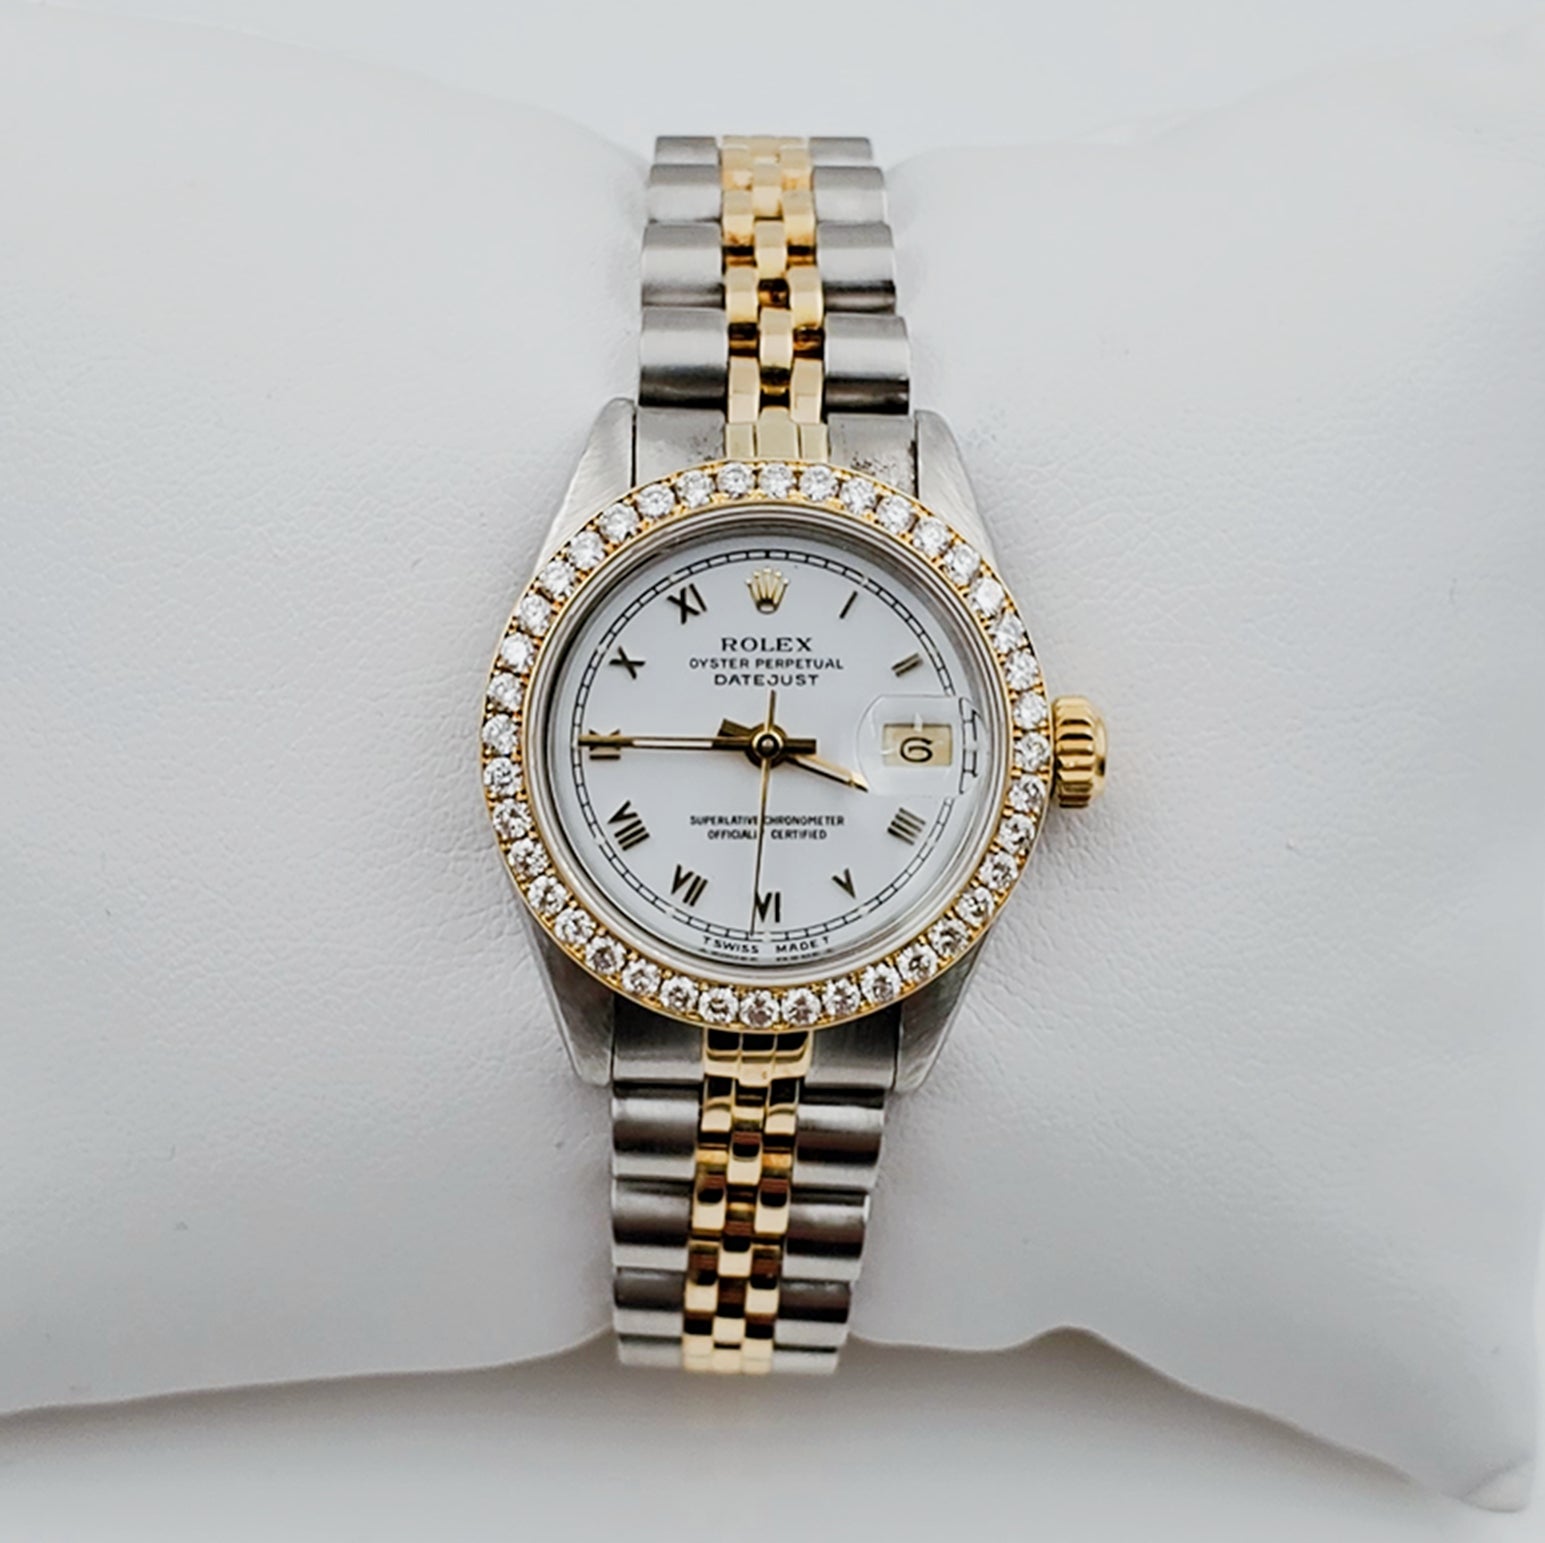 Ladies Rolex 26mm DateJust 18K Gold Two Tone Watch with White Dial, Roman Numerals and Diamond Bezel. (Pre-Owned)